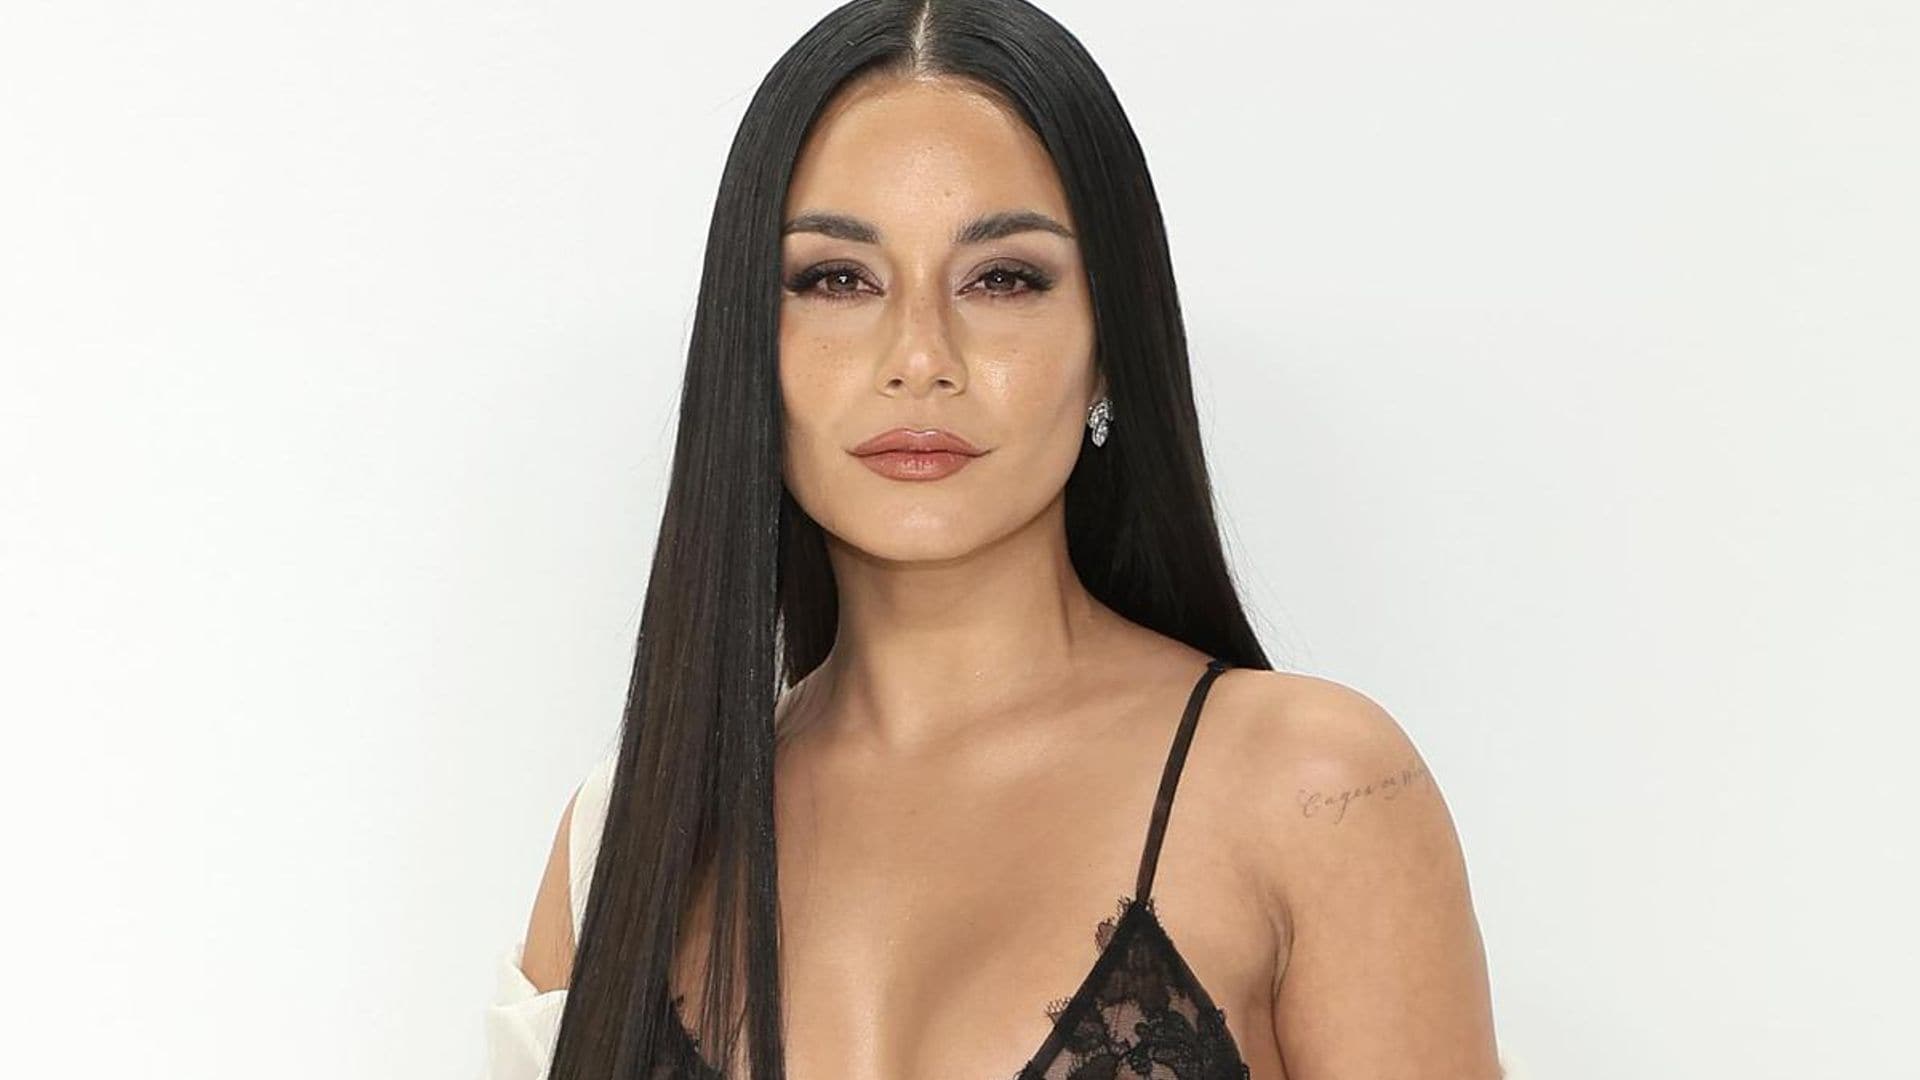 Vanessa Hudgens puts her health first and reveals important New Year’s resolution